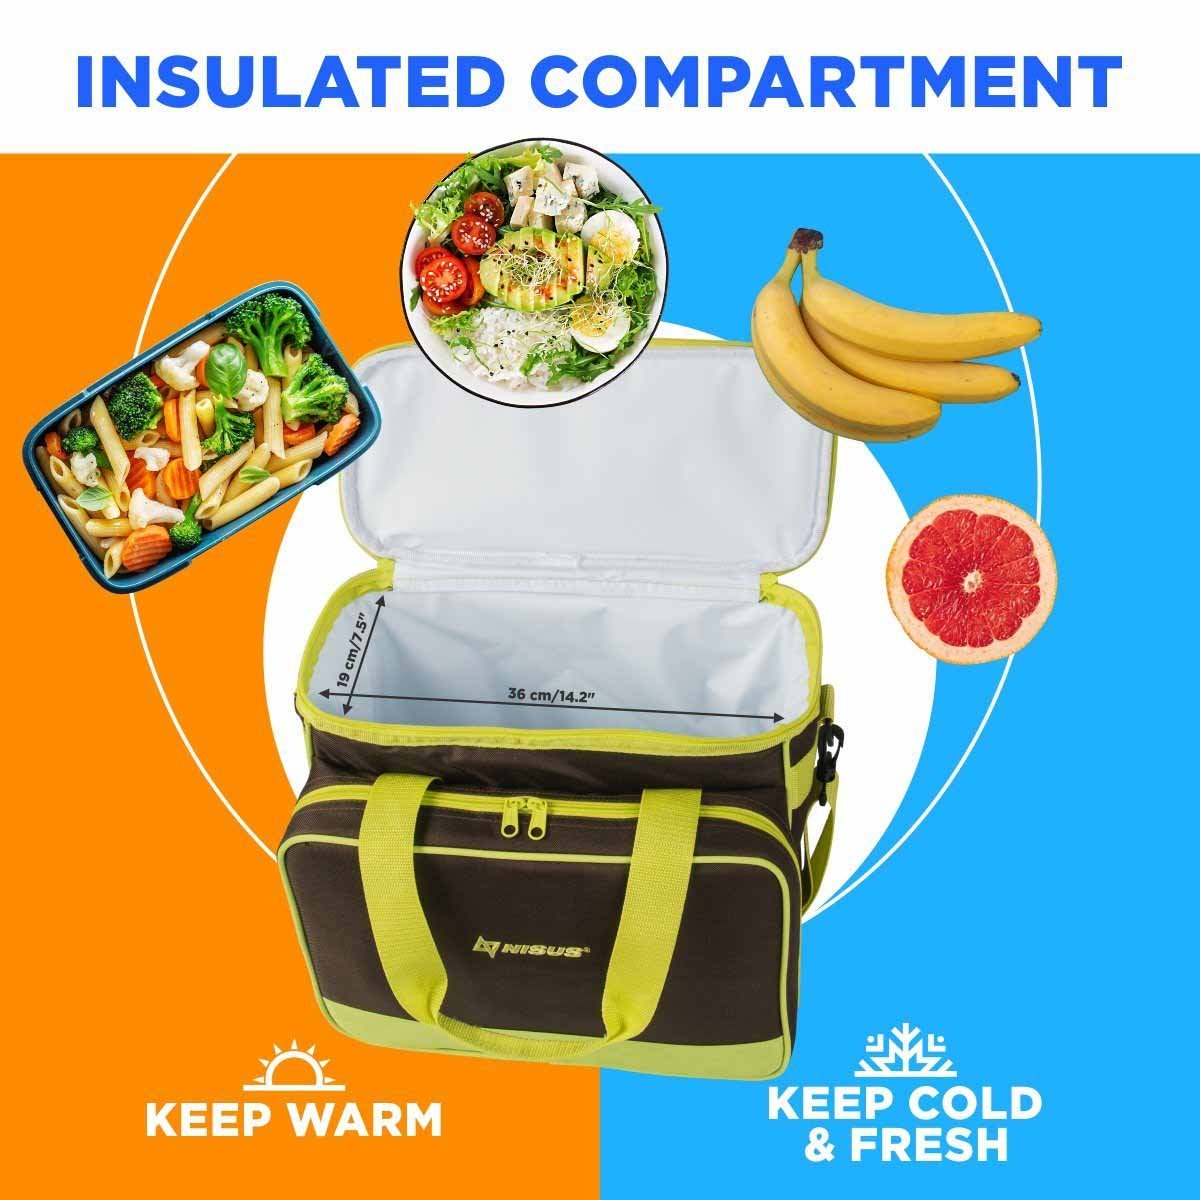 Four-Person Picnic Set with Insulated Bag